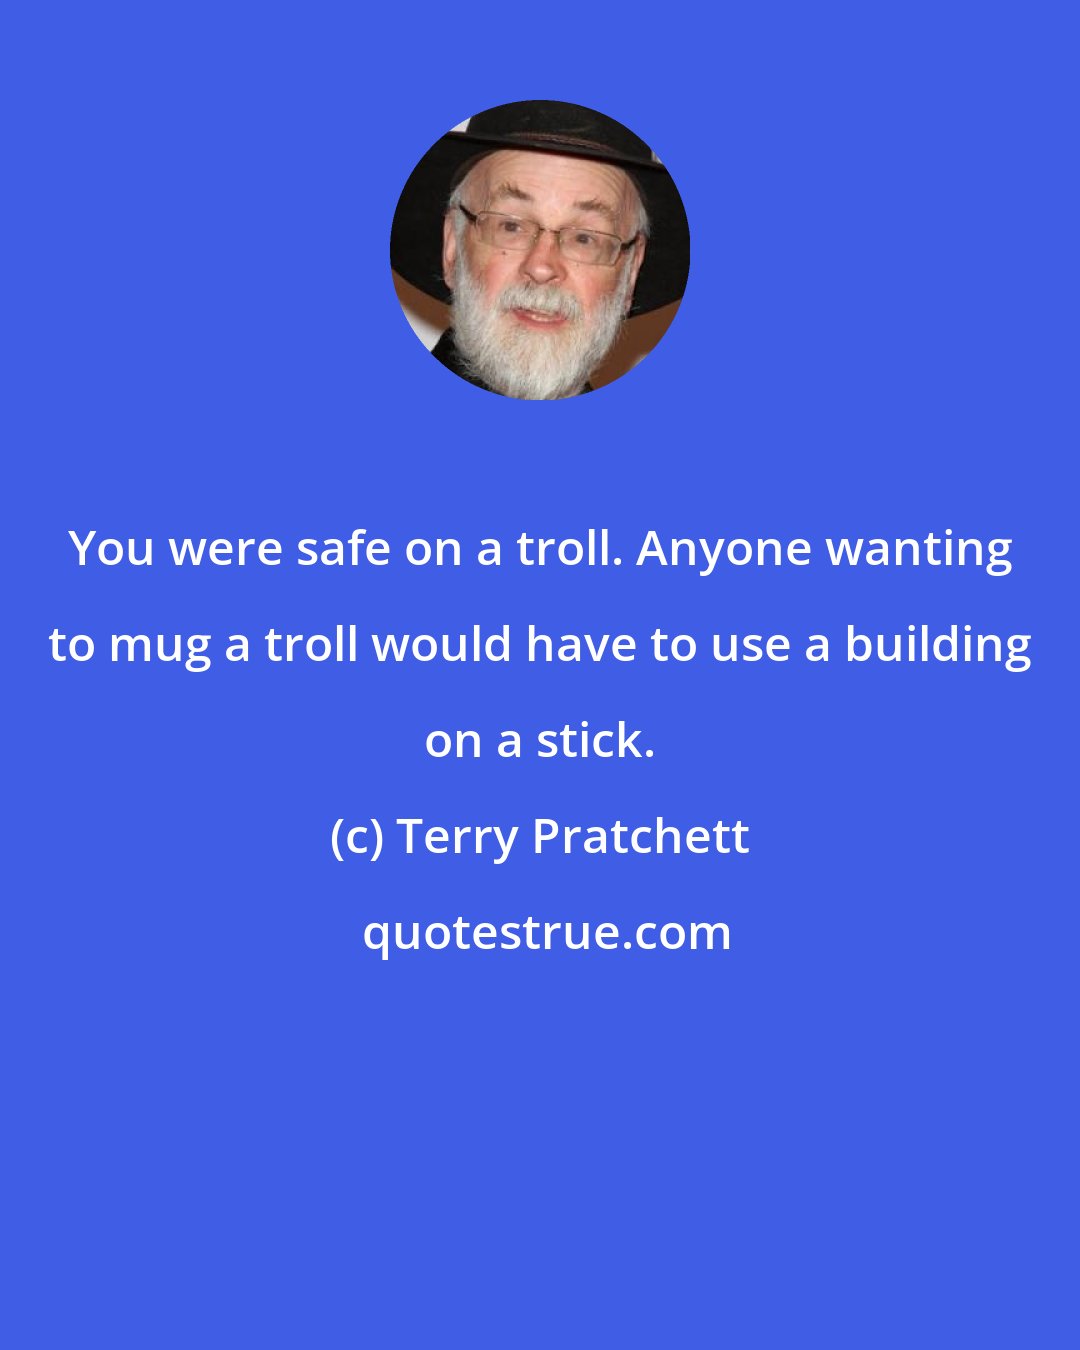 Terry Pratchett: You were safe on a troll. Anyone wanting to mug a troll would have to use a building on a stick.